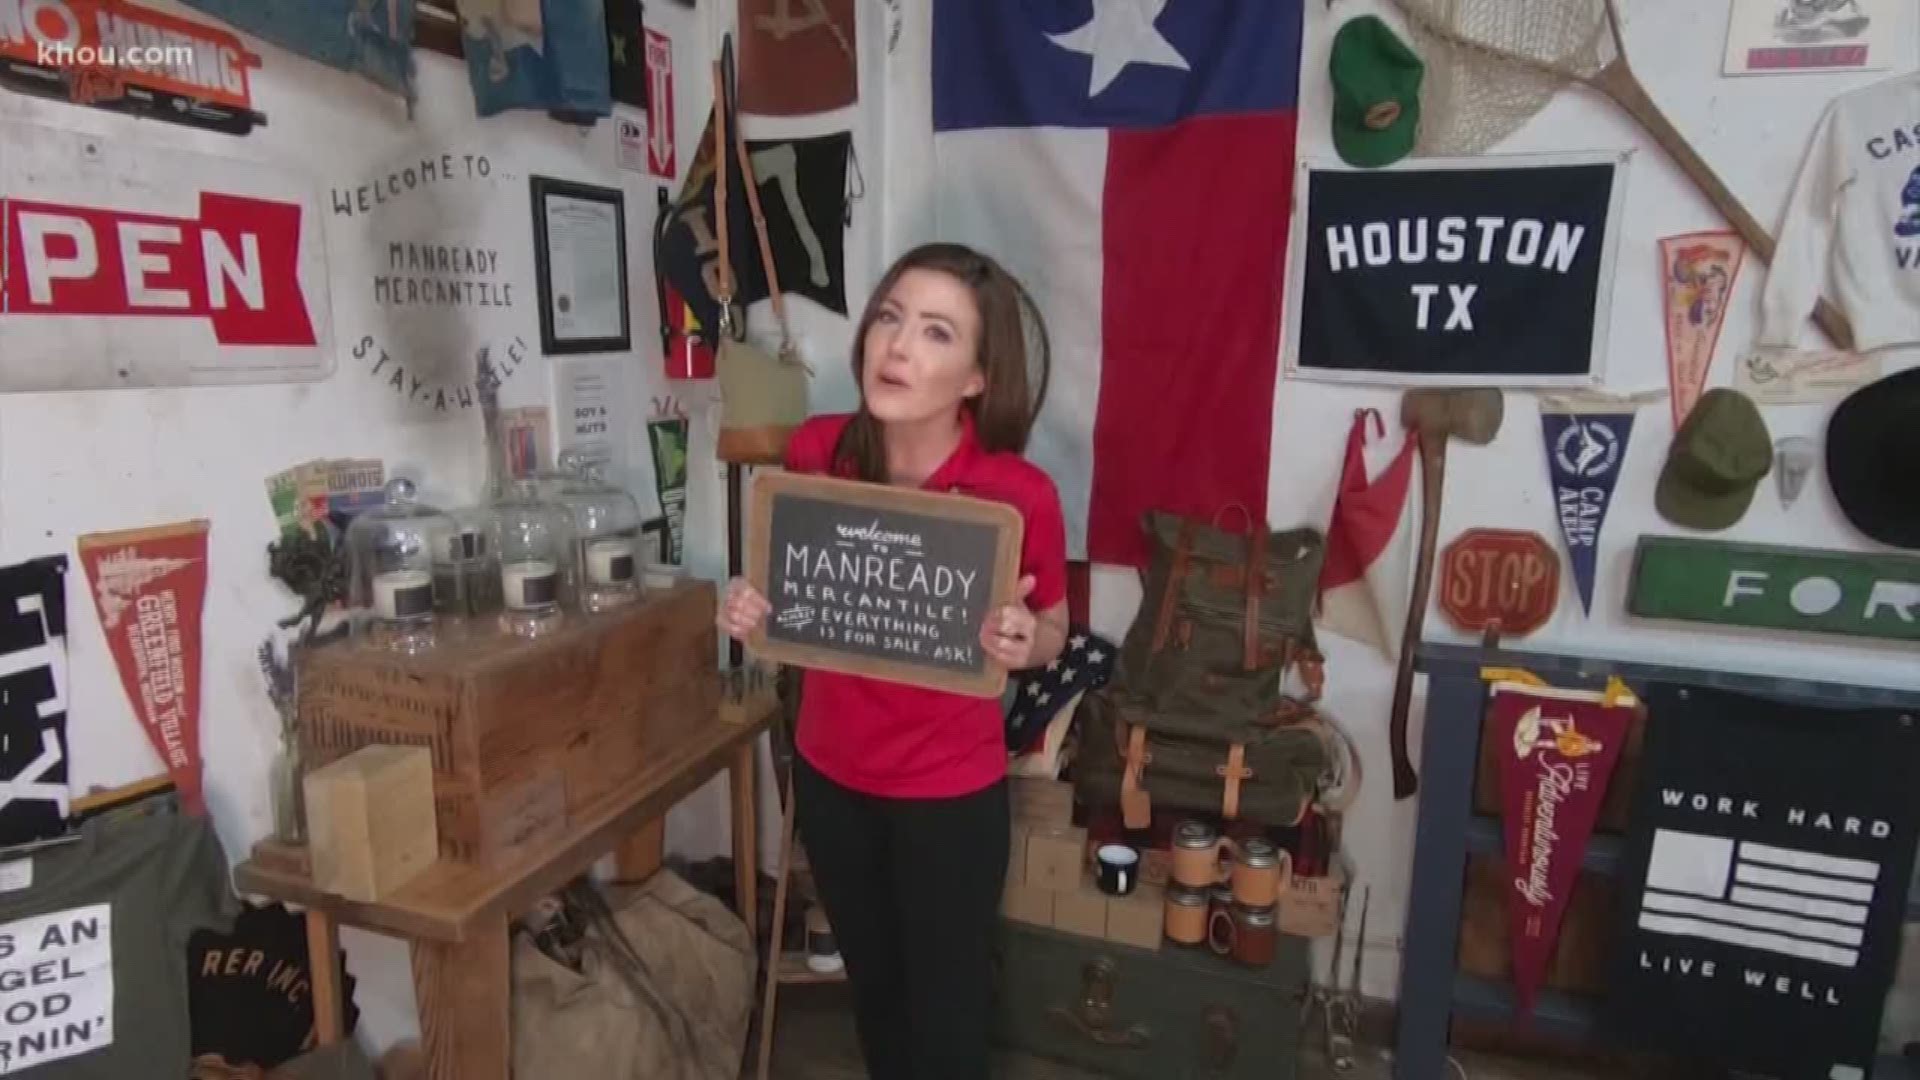 Manready Mercantile and Space Montrose are two of the more than 600,000 small businesses in Houston and Southeast Texas.